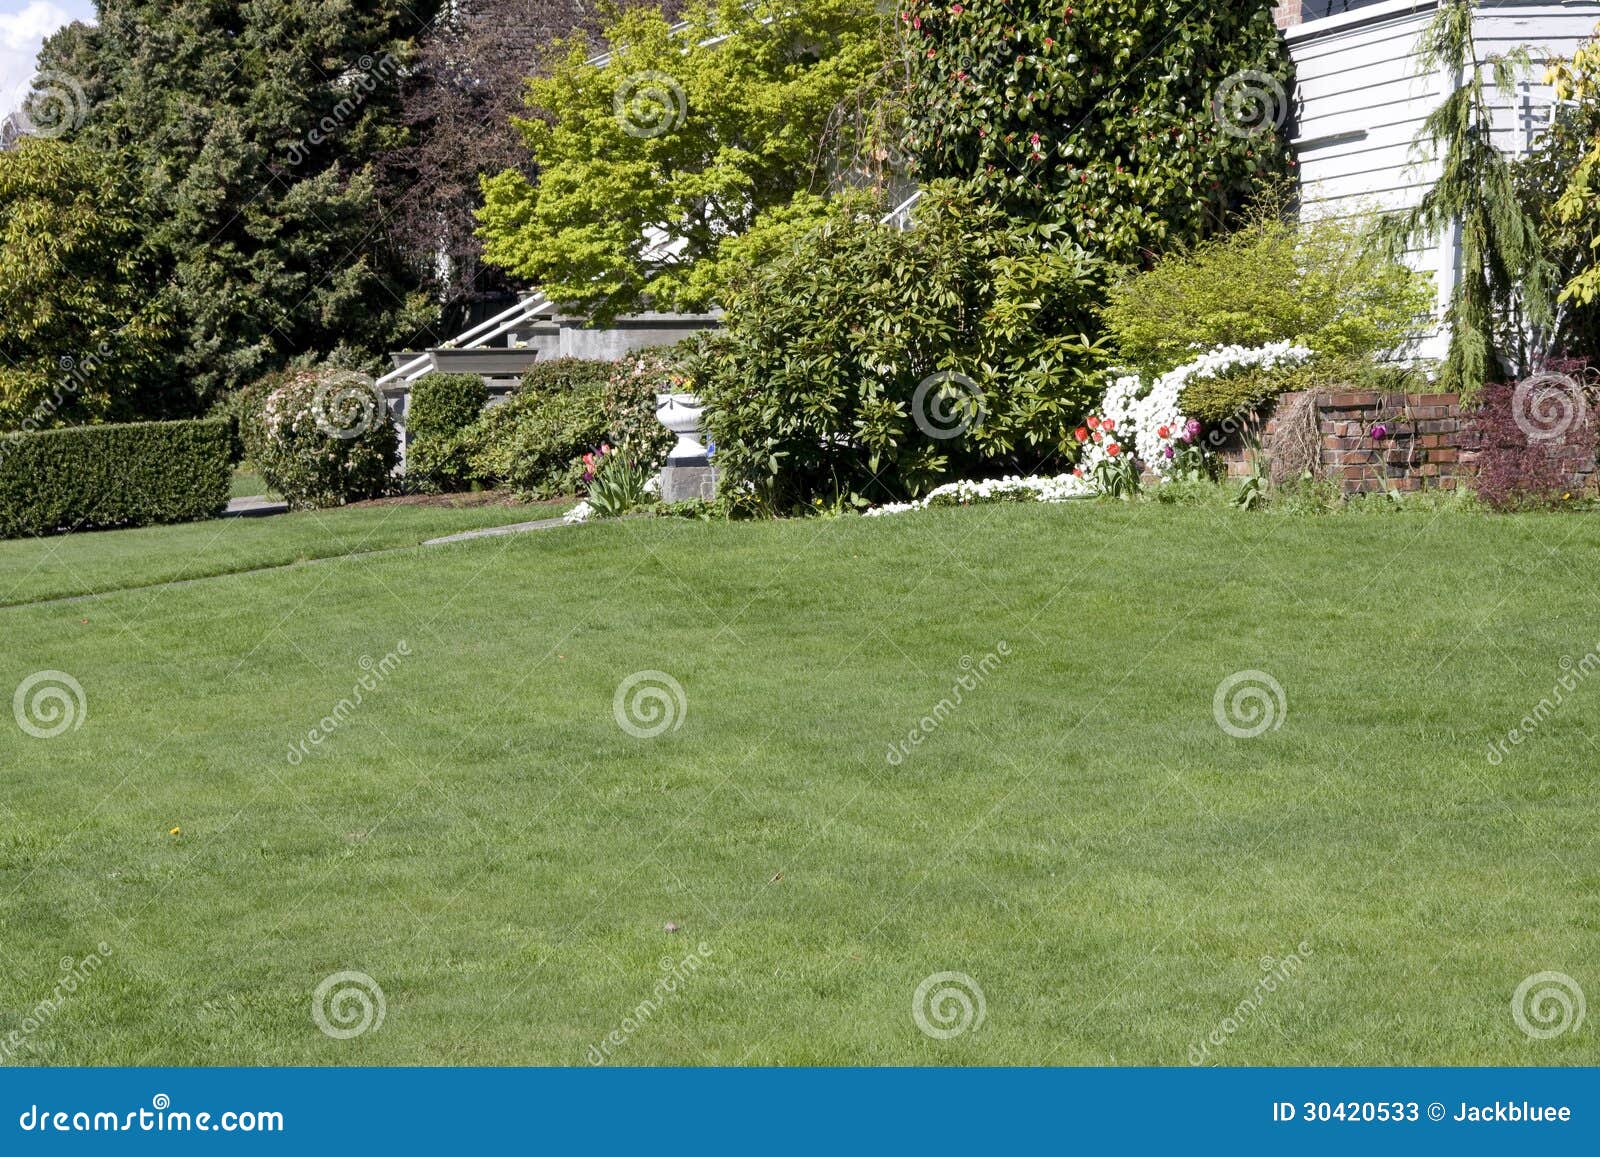 nice lawn in front yard